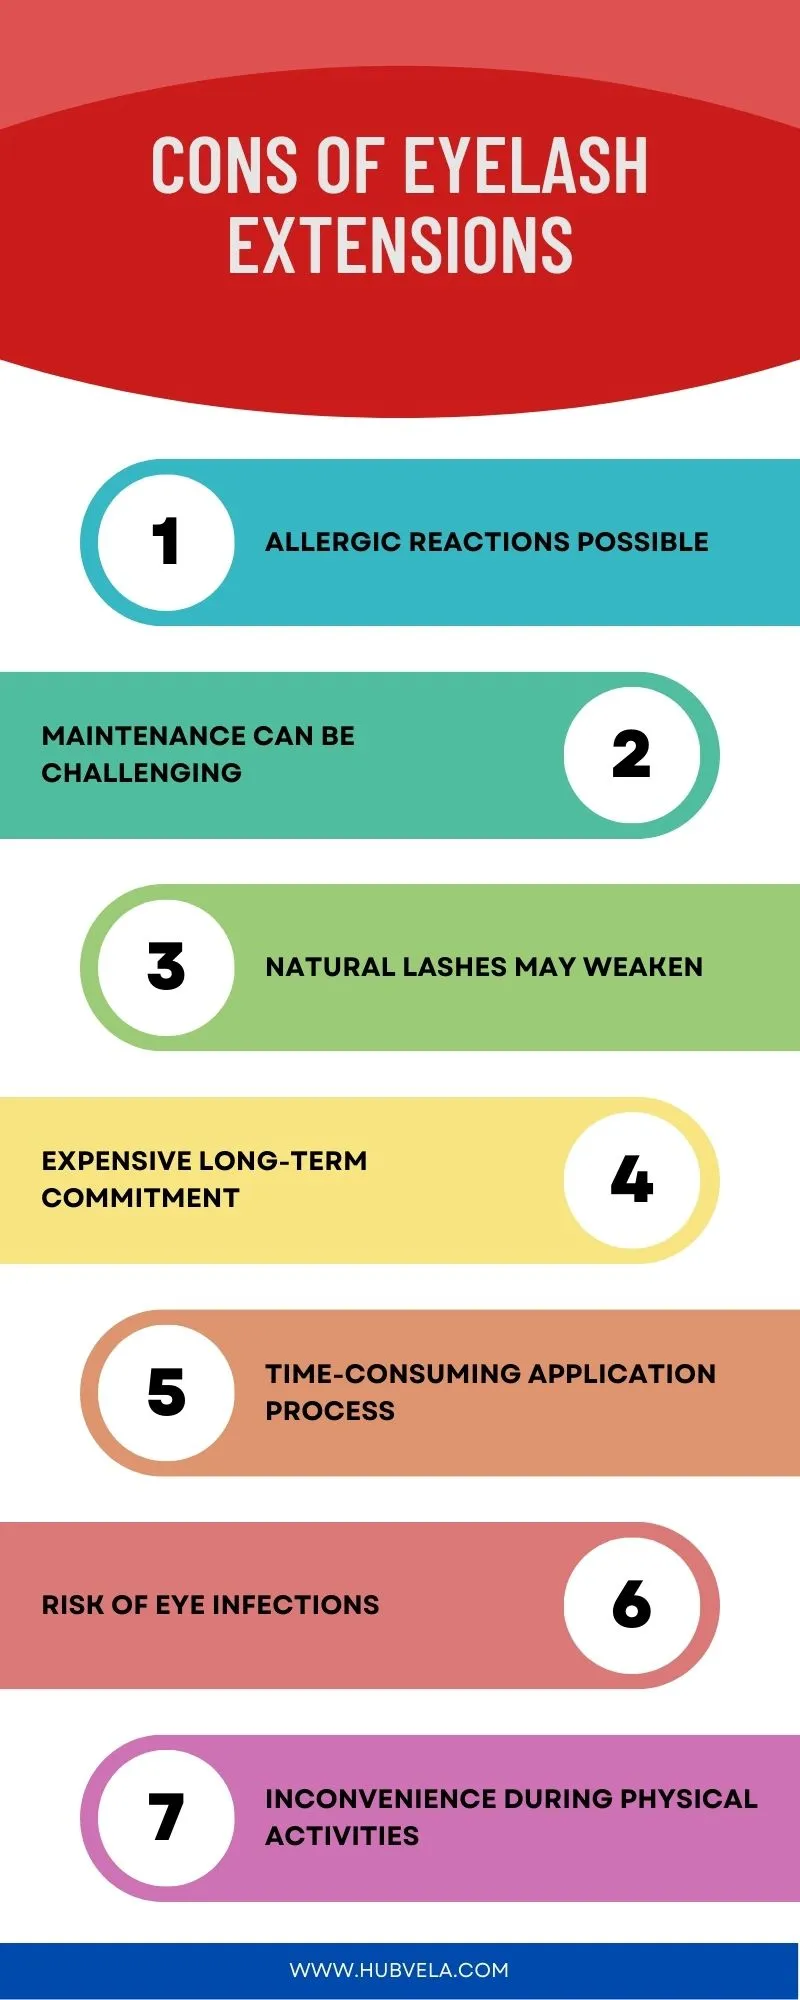 Cons of Eyelash Extensions Infographic